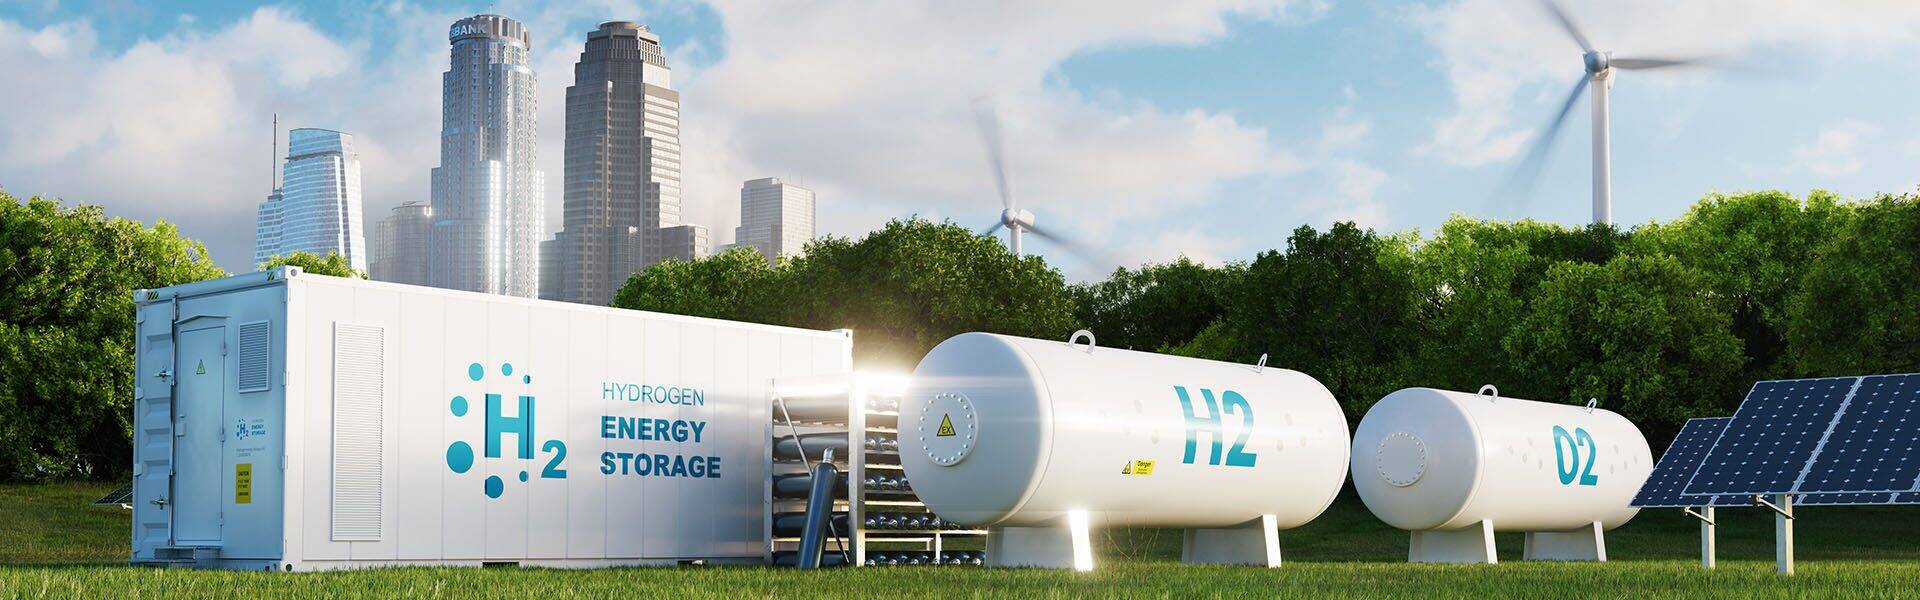 Uniper and Siemens ‘ready to invest’ in green hydrogen